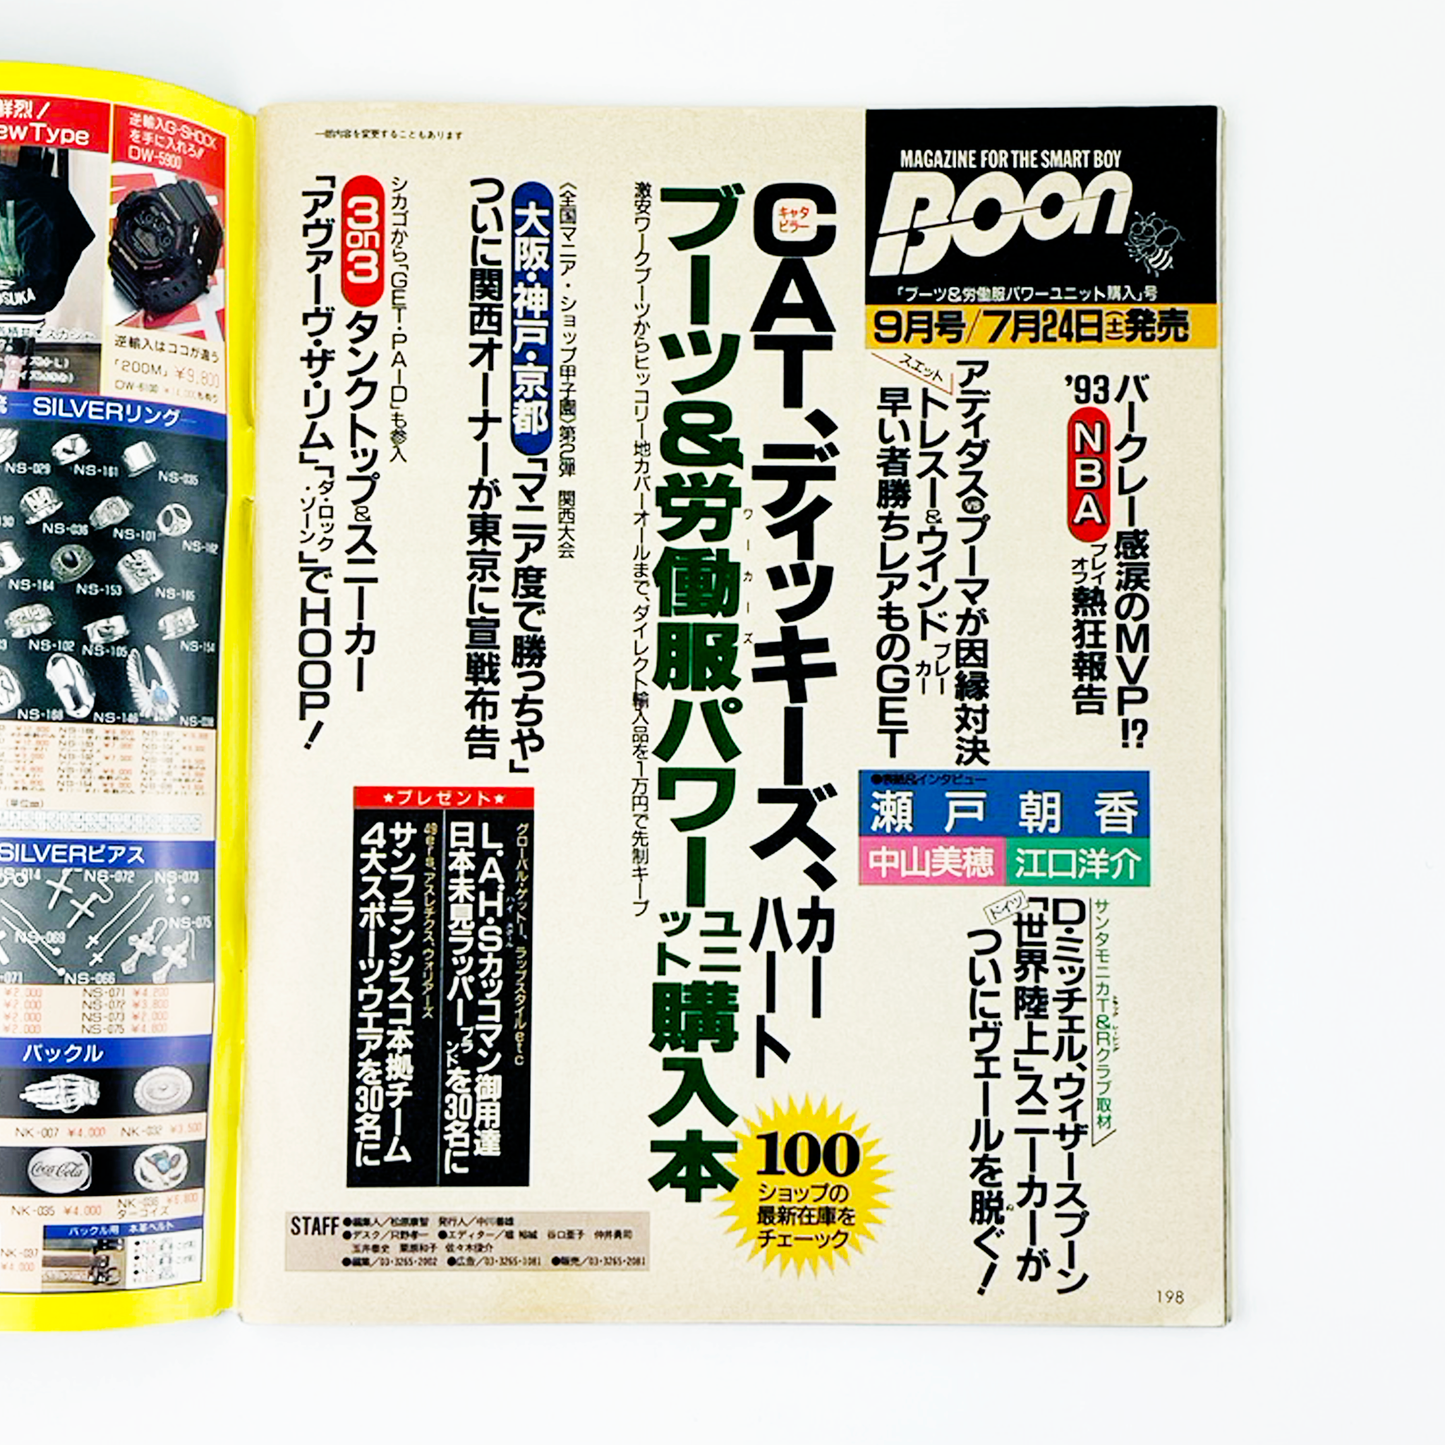 BOON 8月号 1993 AUGUST 平成5年8月 | ブーン編集部